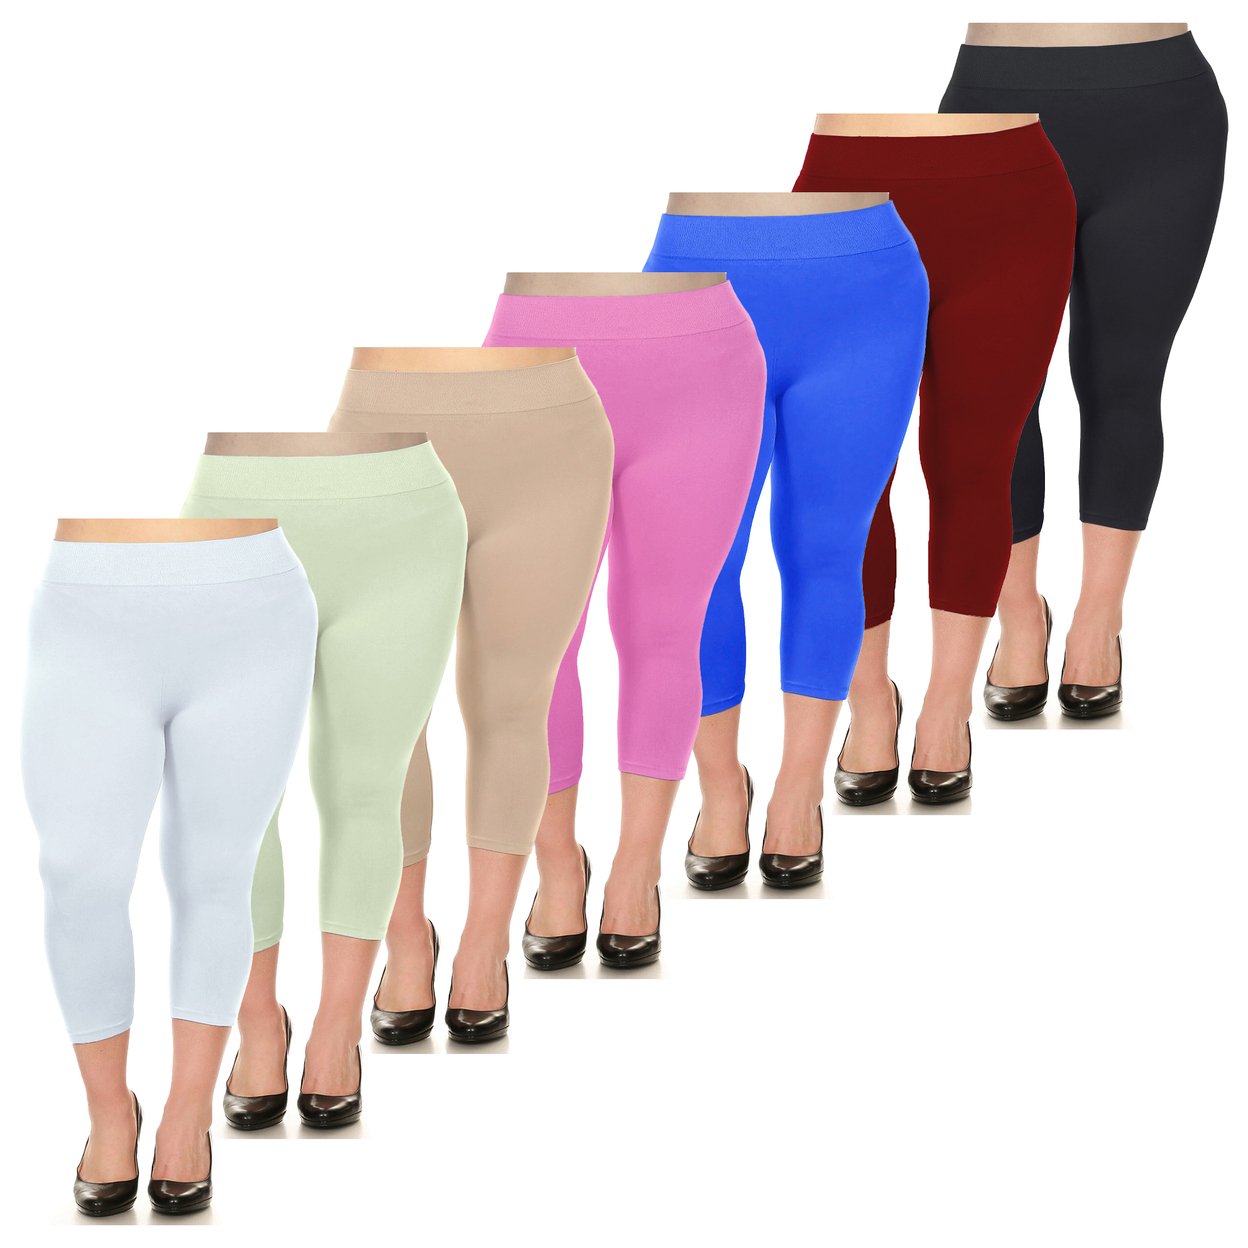 Women's Ultra-Soft High Waisted Smooth Stretch Active Yoga Capri Leggings Plus Size Available - Red, 1x